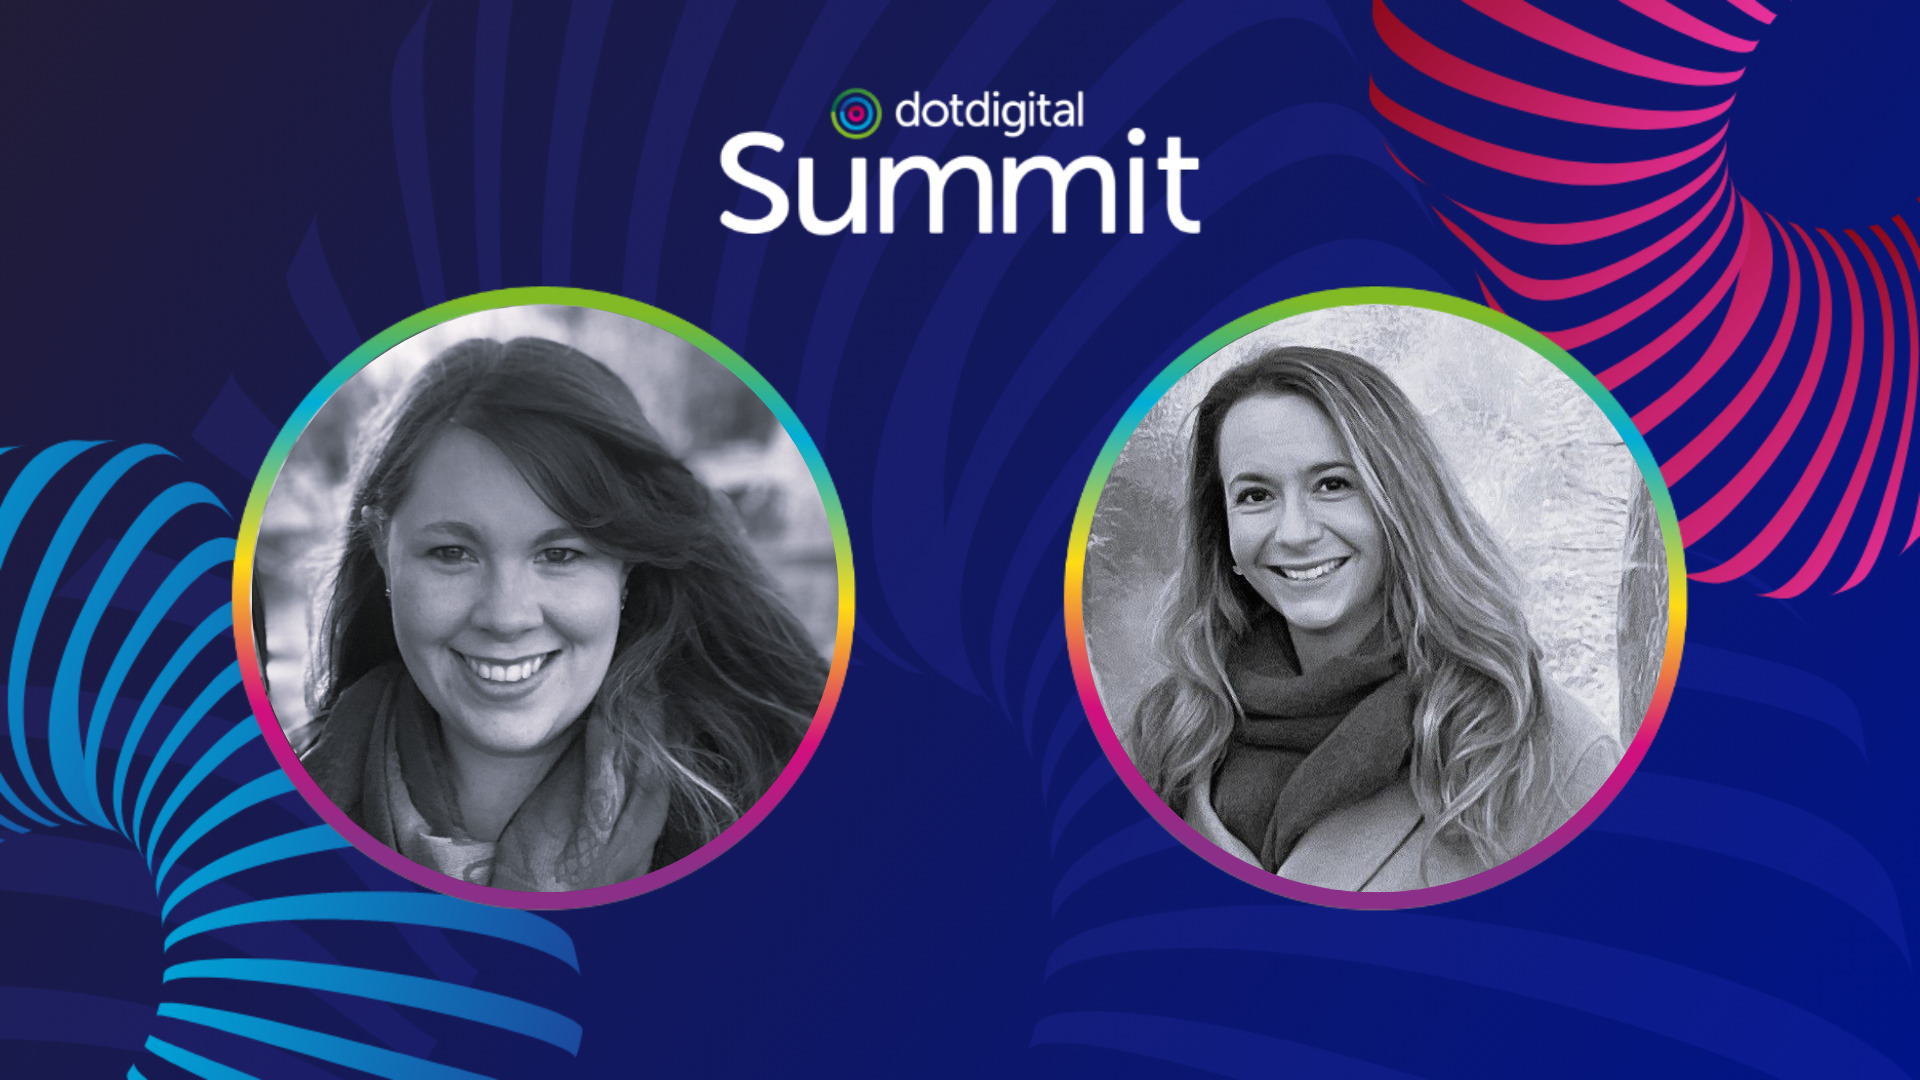 Interview with Lily and Emma from Stroke Association for the Dotdigital Summit.